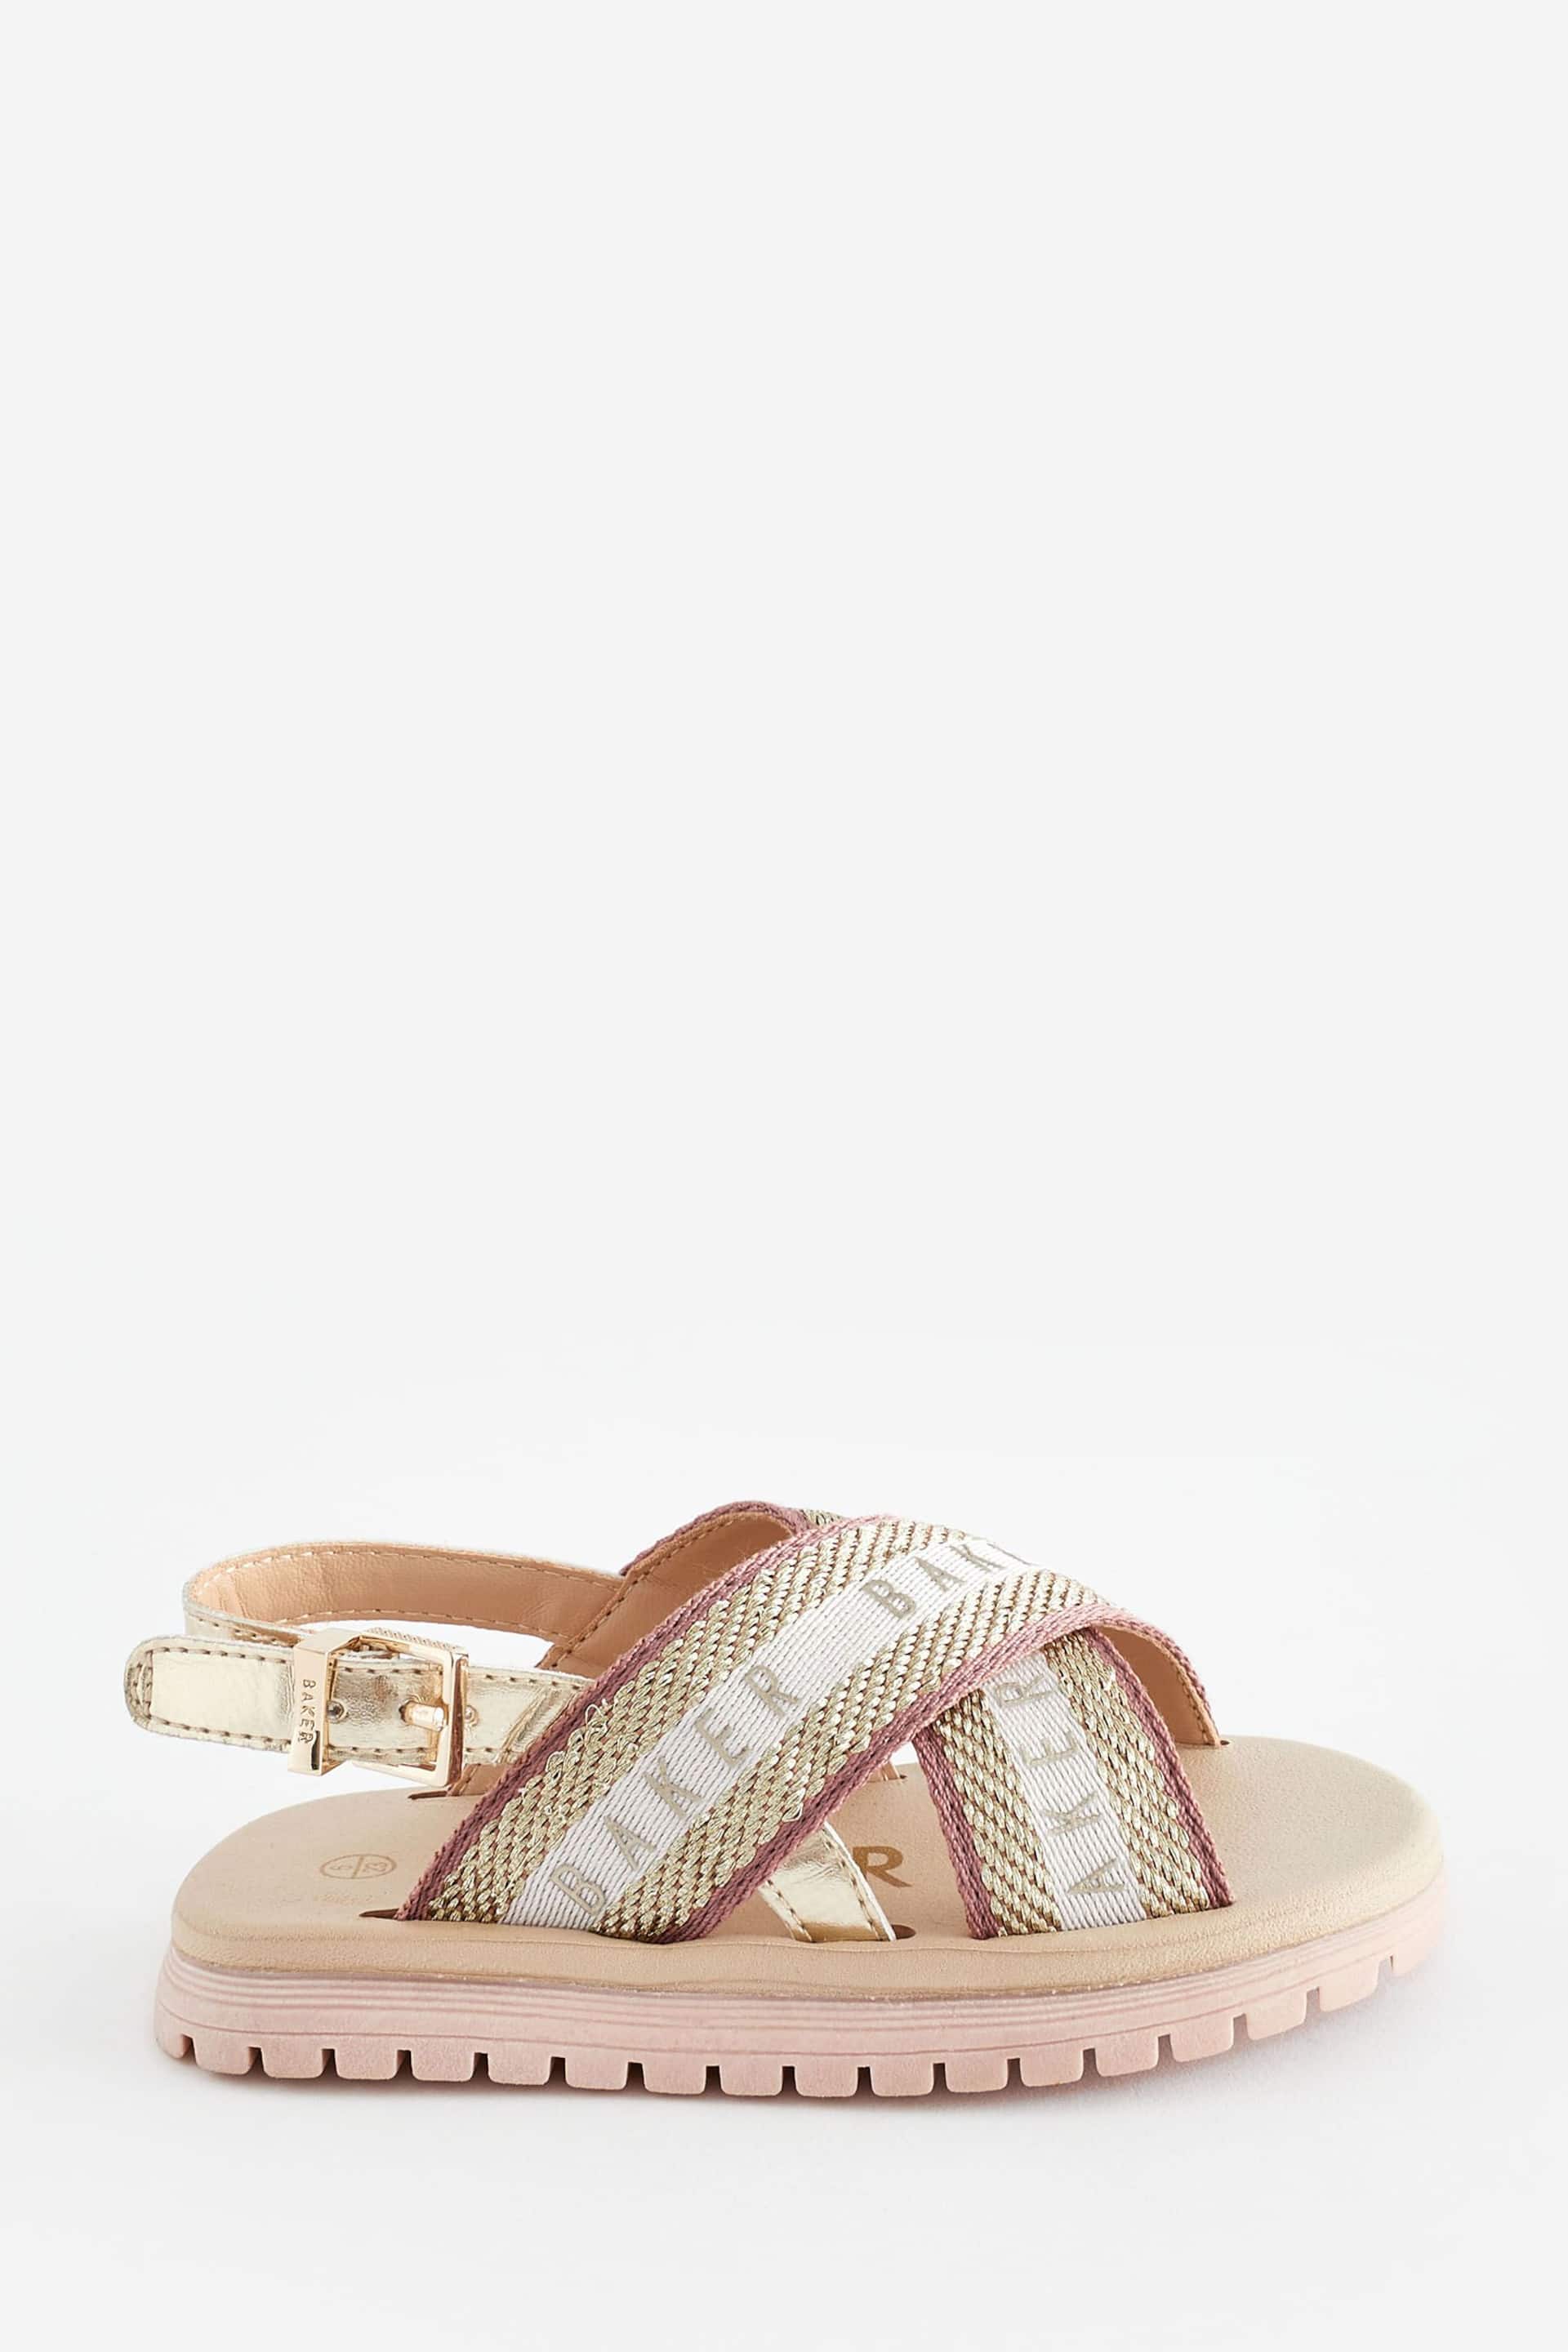 Baker by Ted Baker Girls Woven and Metallic Wedge Sandals - Image 2 of 6